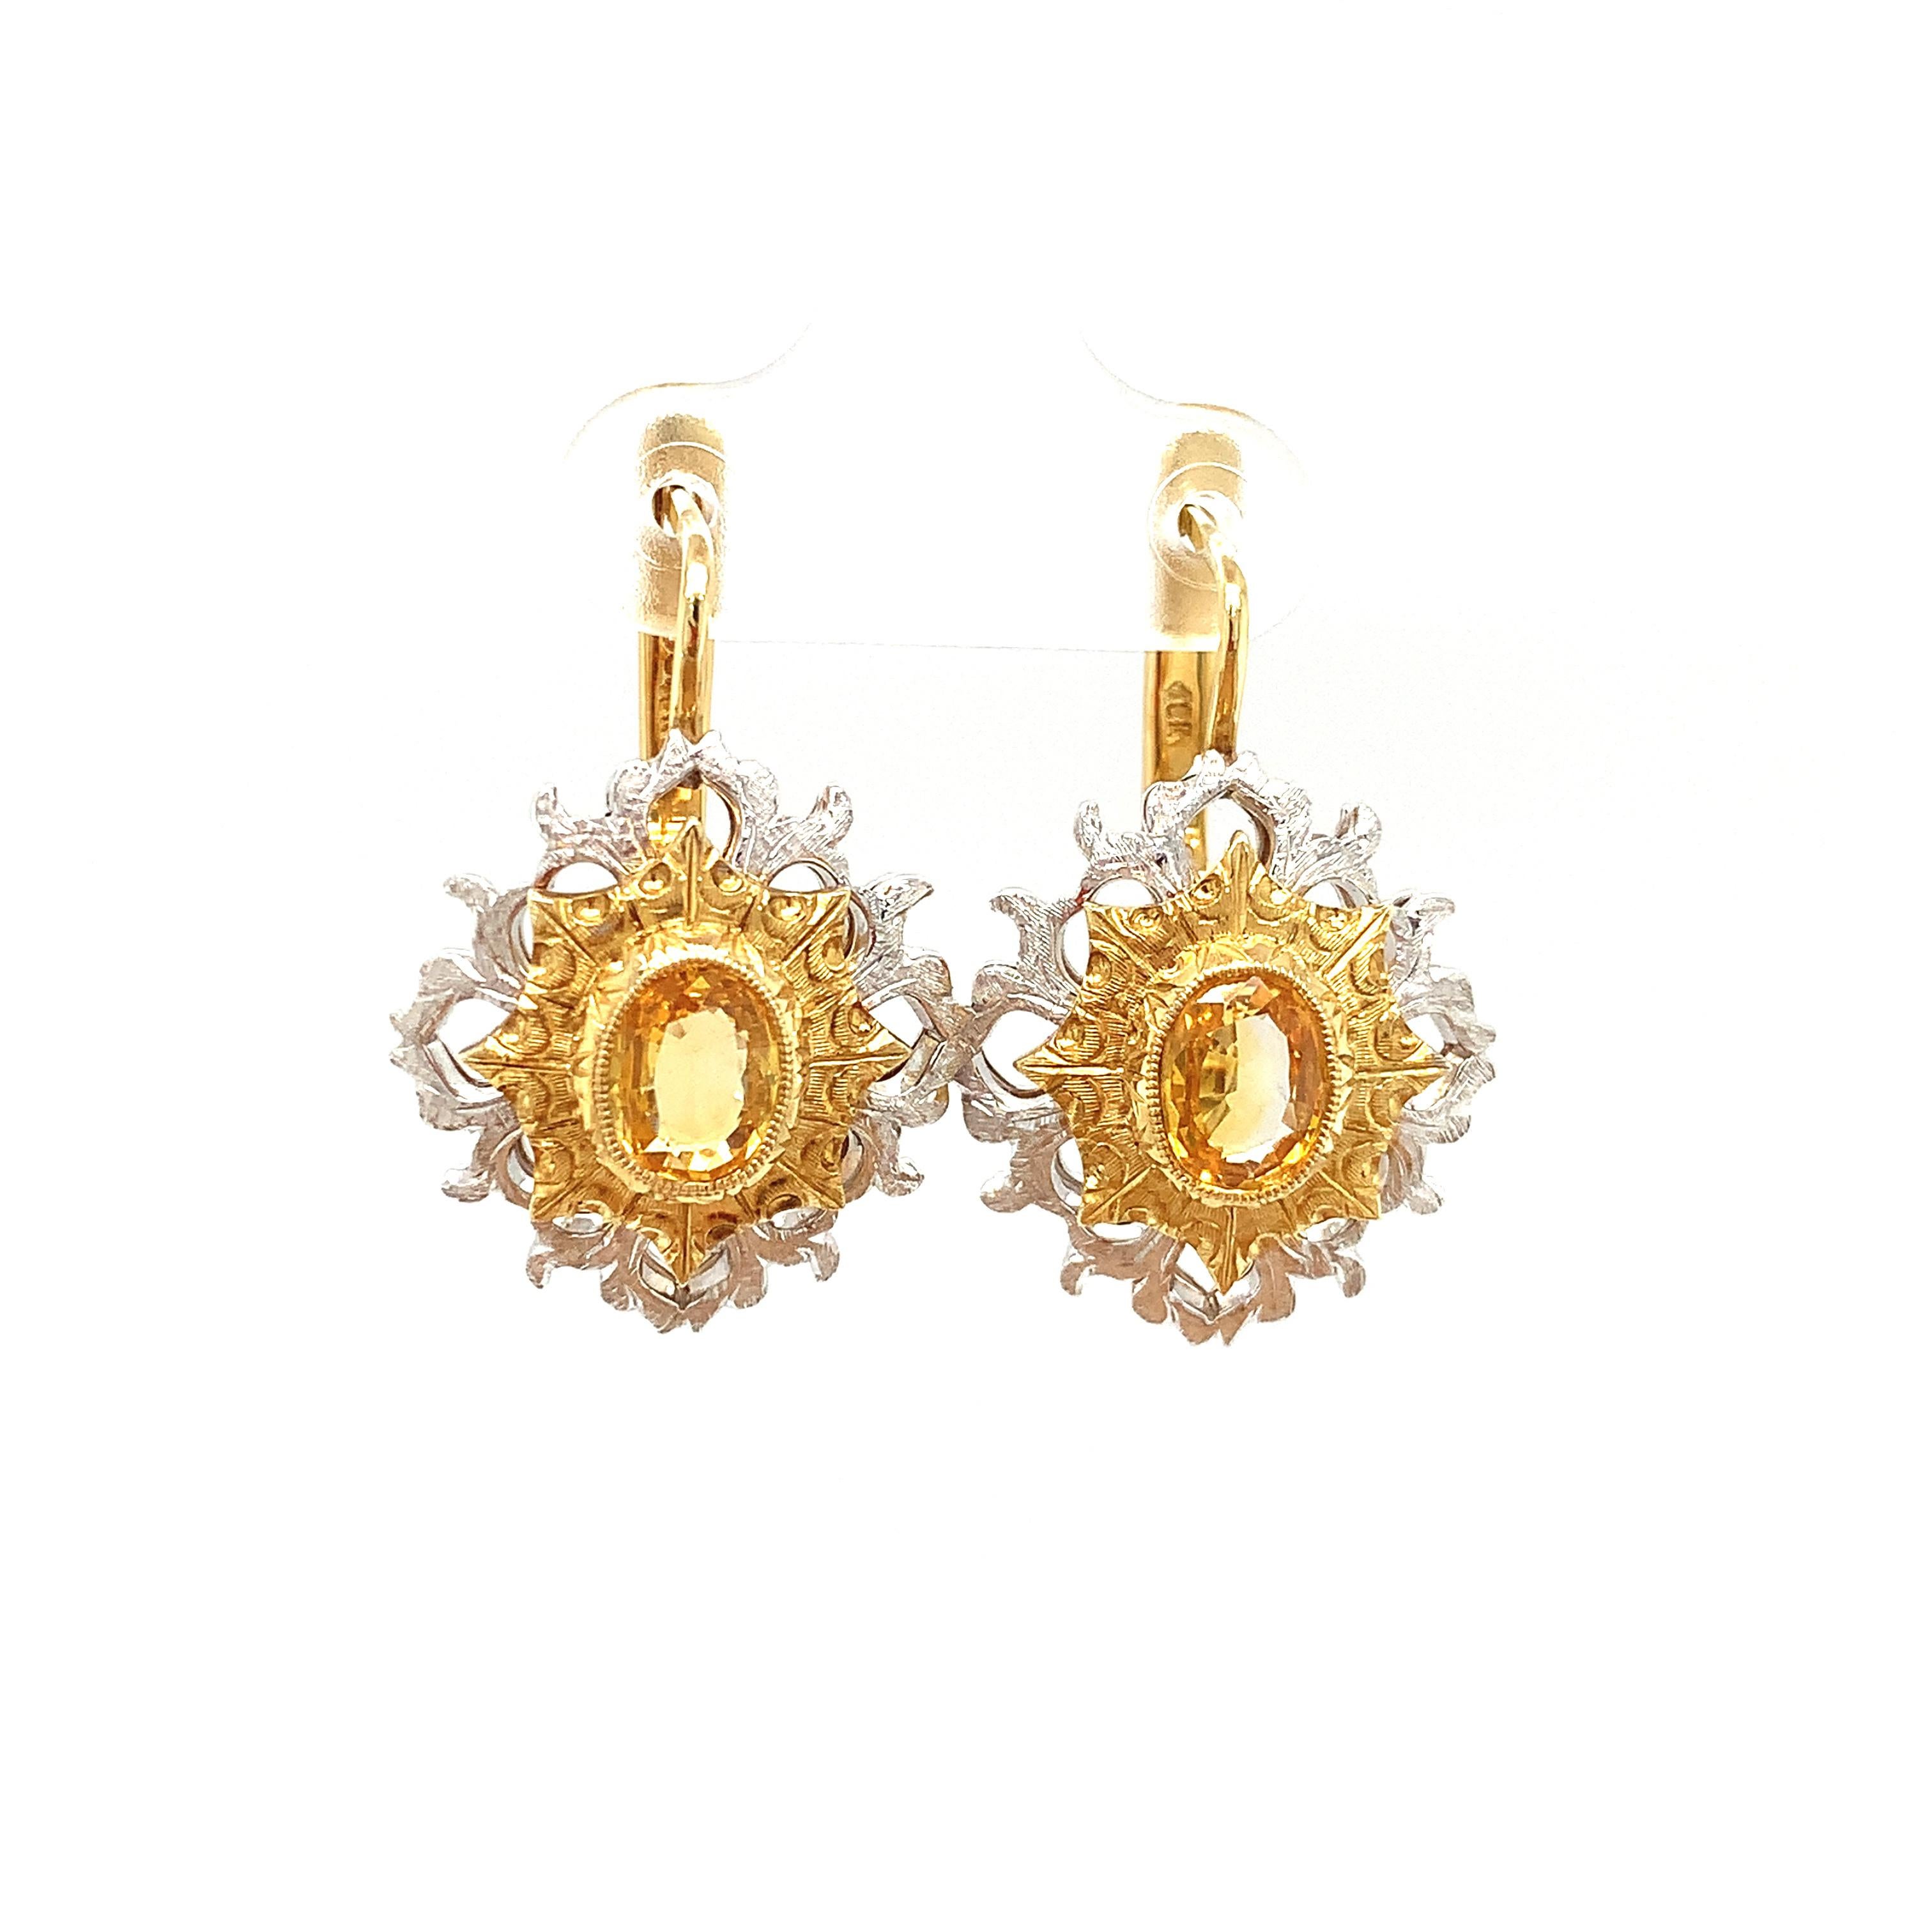 Oval Cut Yellow Sapphire Drop Earrings in 18K White and Yellow Gold, 1.79 Carat Total For Sale